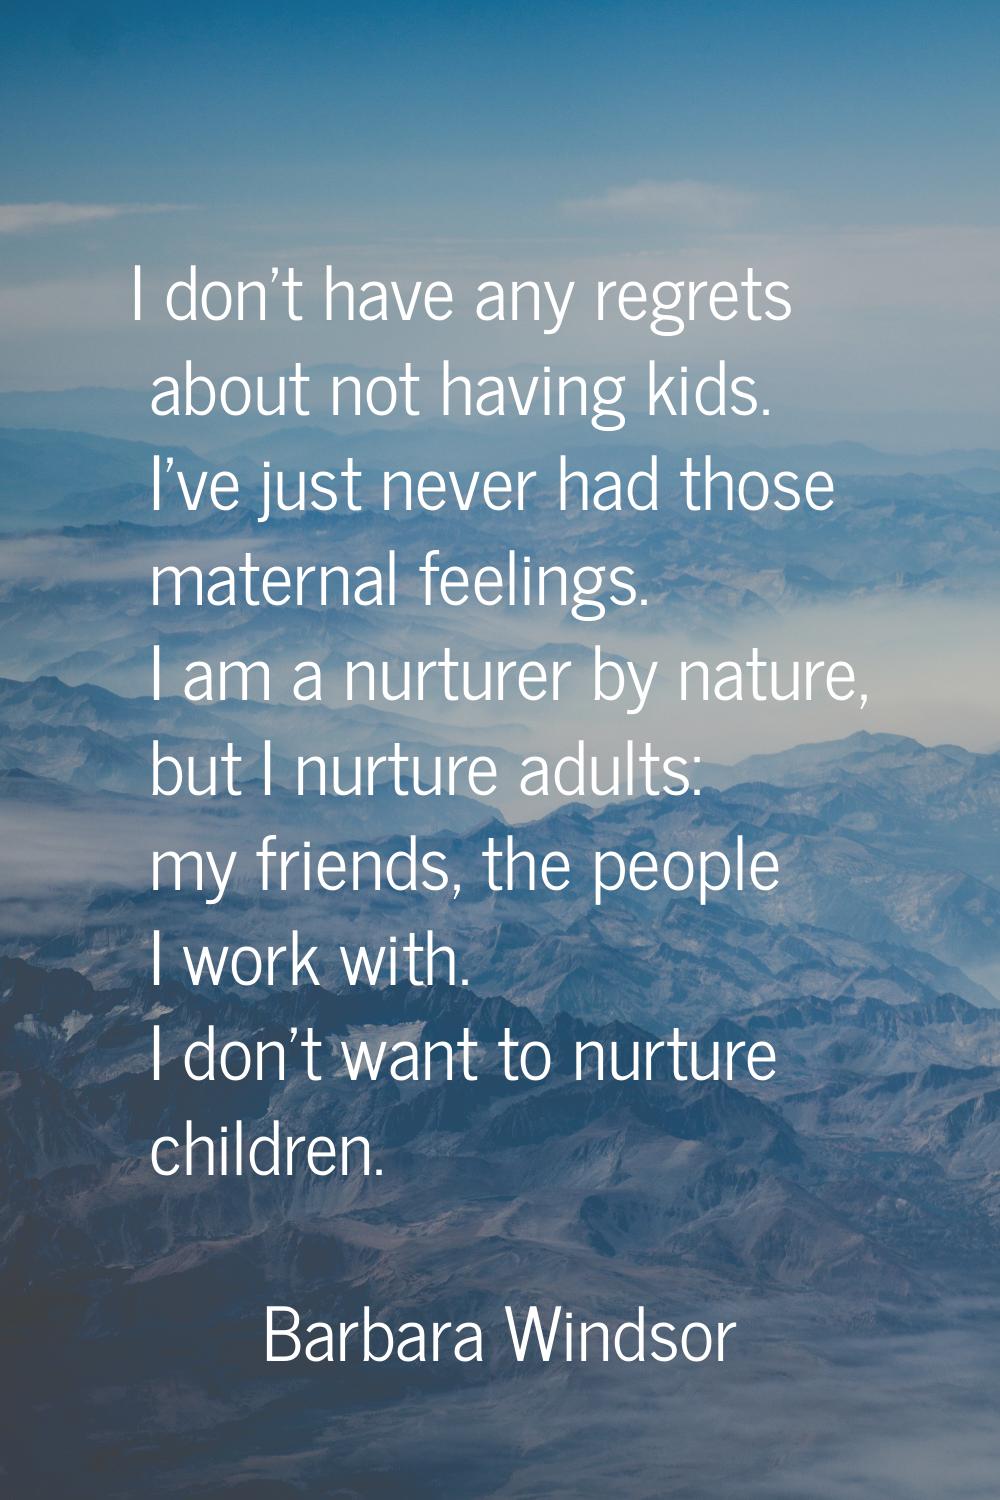 I don't have any regrets about not having kids. I've just never had those maternal feelings. I am a